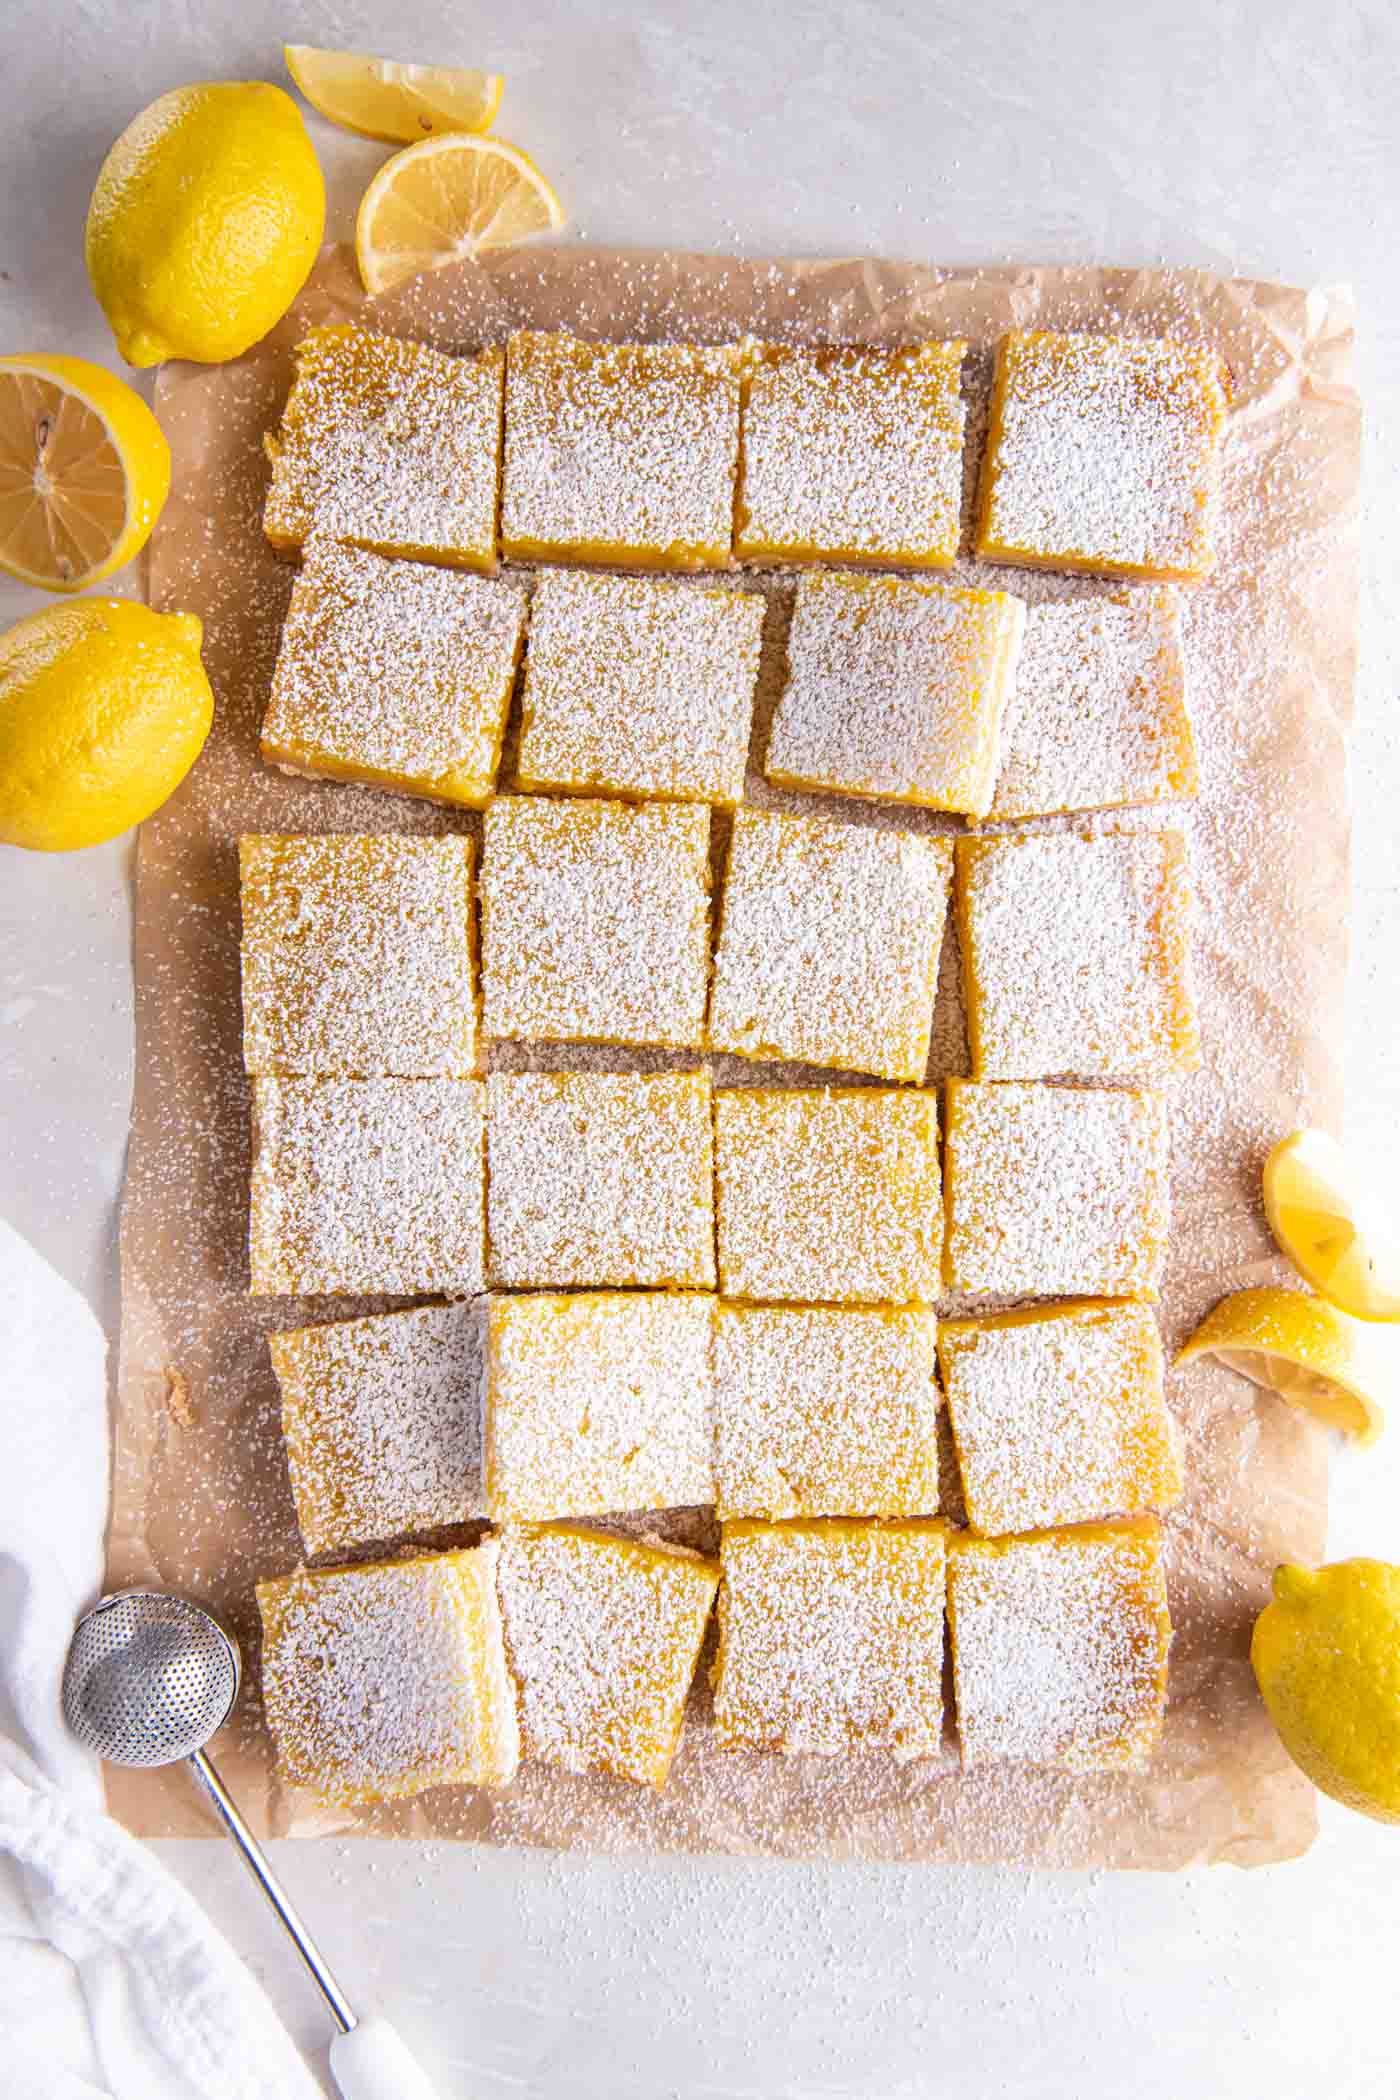 Lemon bars cut into squares and dusted with powdered sugar.